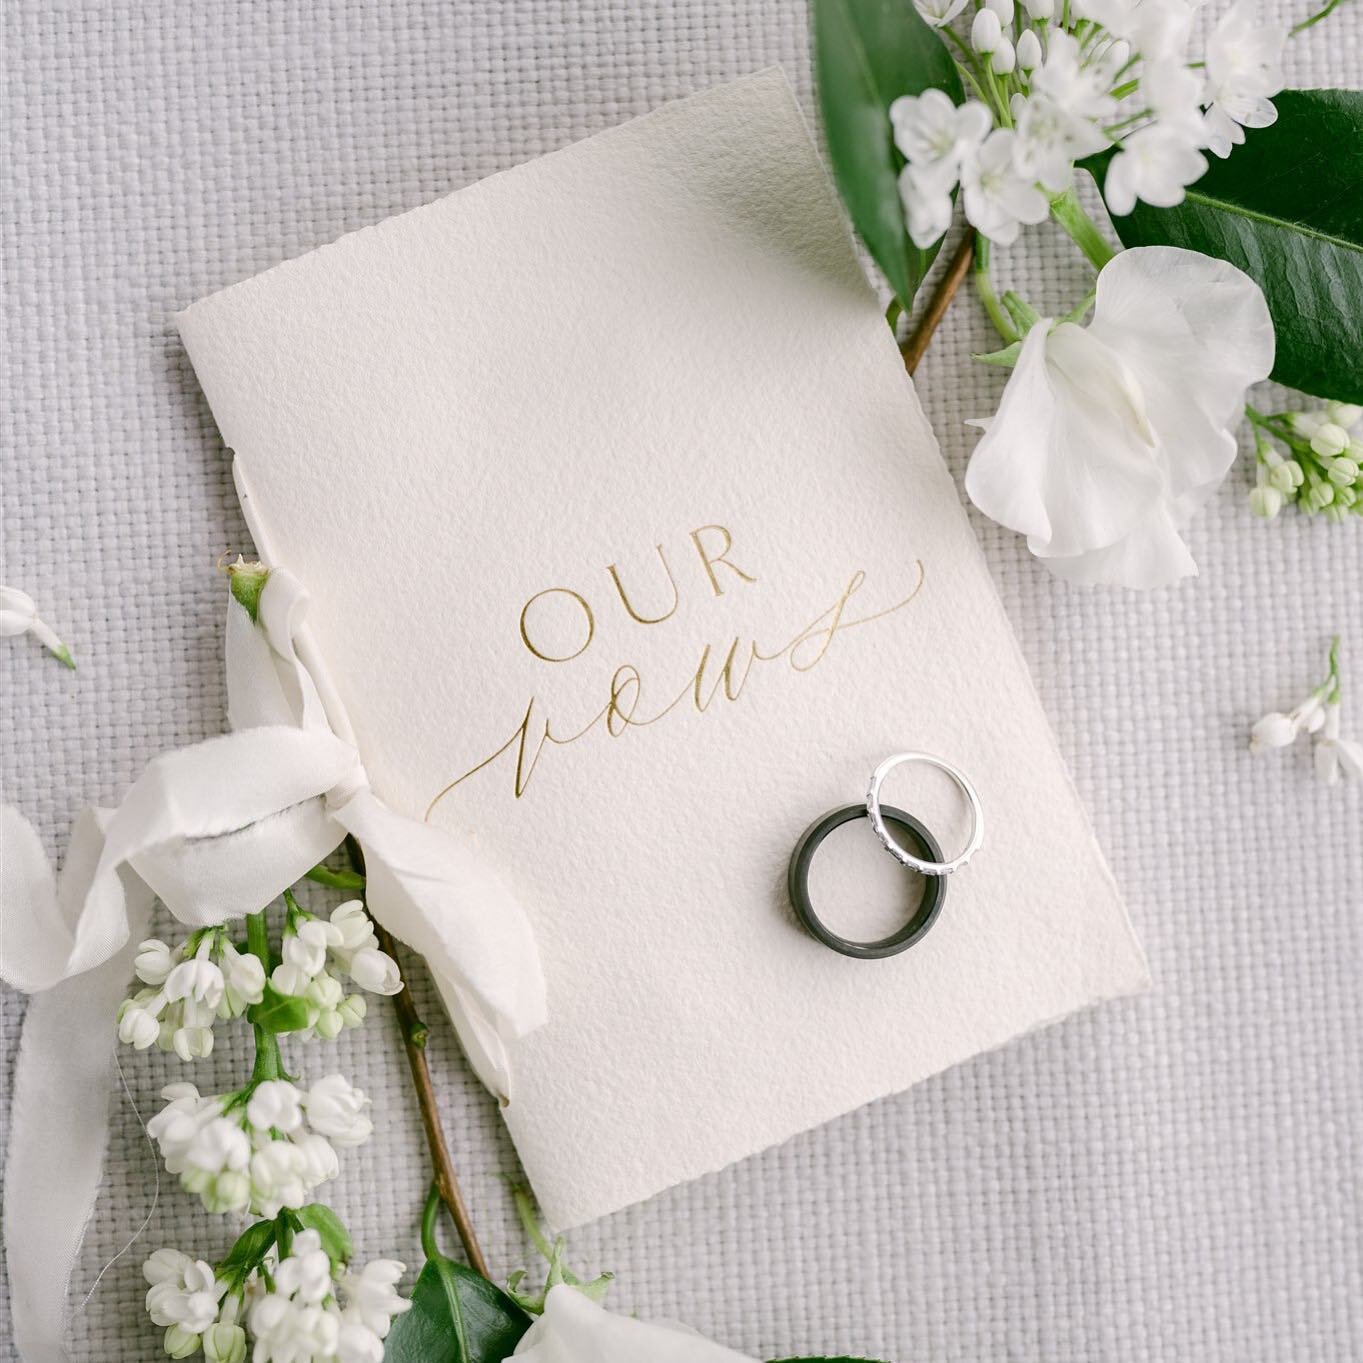 Minimalist wedding details. Love the simplicity of these vow books made by @enamourdesign 

Would you or did you write your own vows? 

Photography @blushwedphotos 
Vow Book @enamourdesign